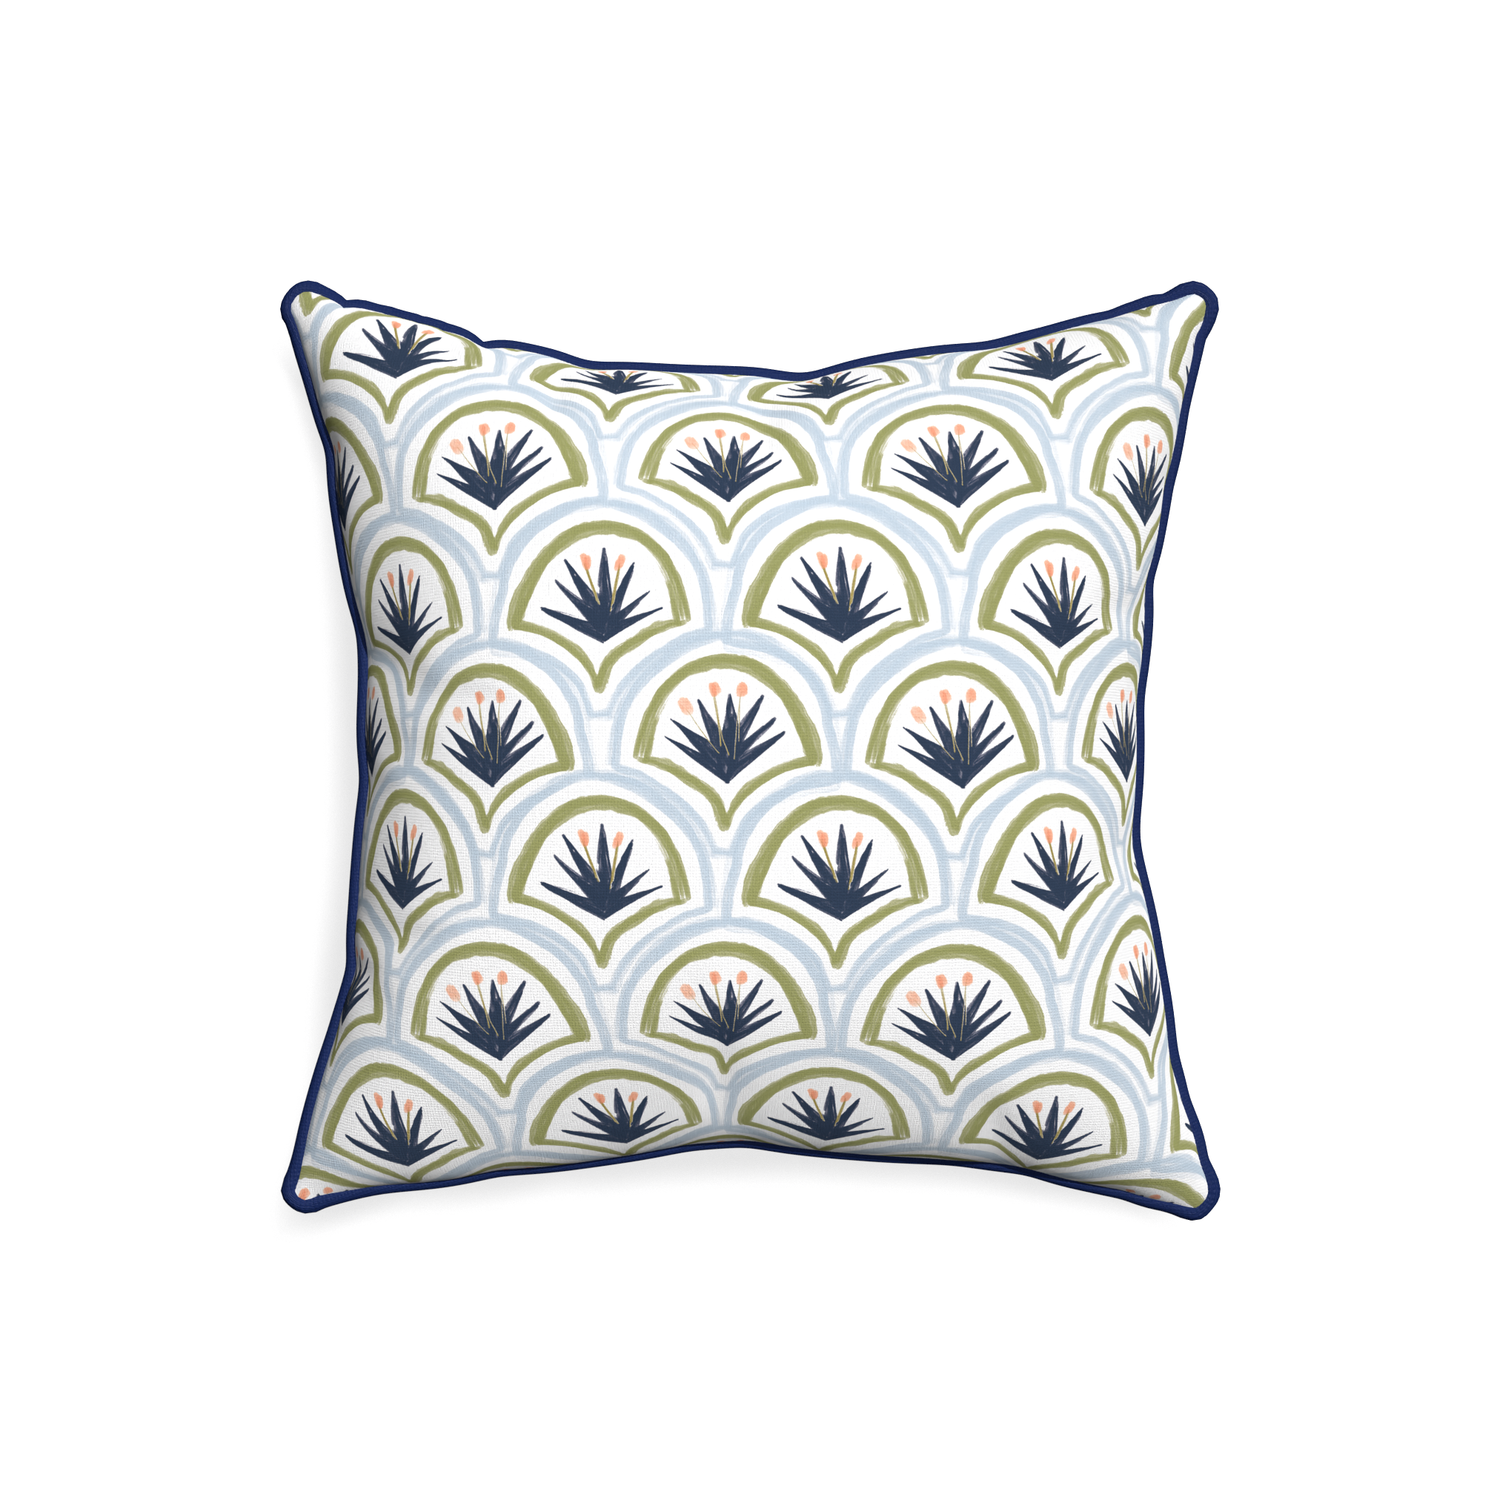 20-square thatcher midnight custom art deco palm patternpillow with midnight piping on white background